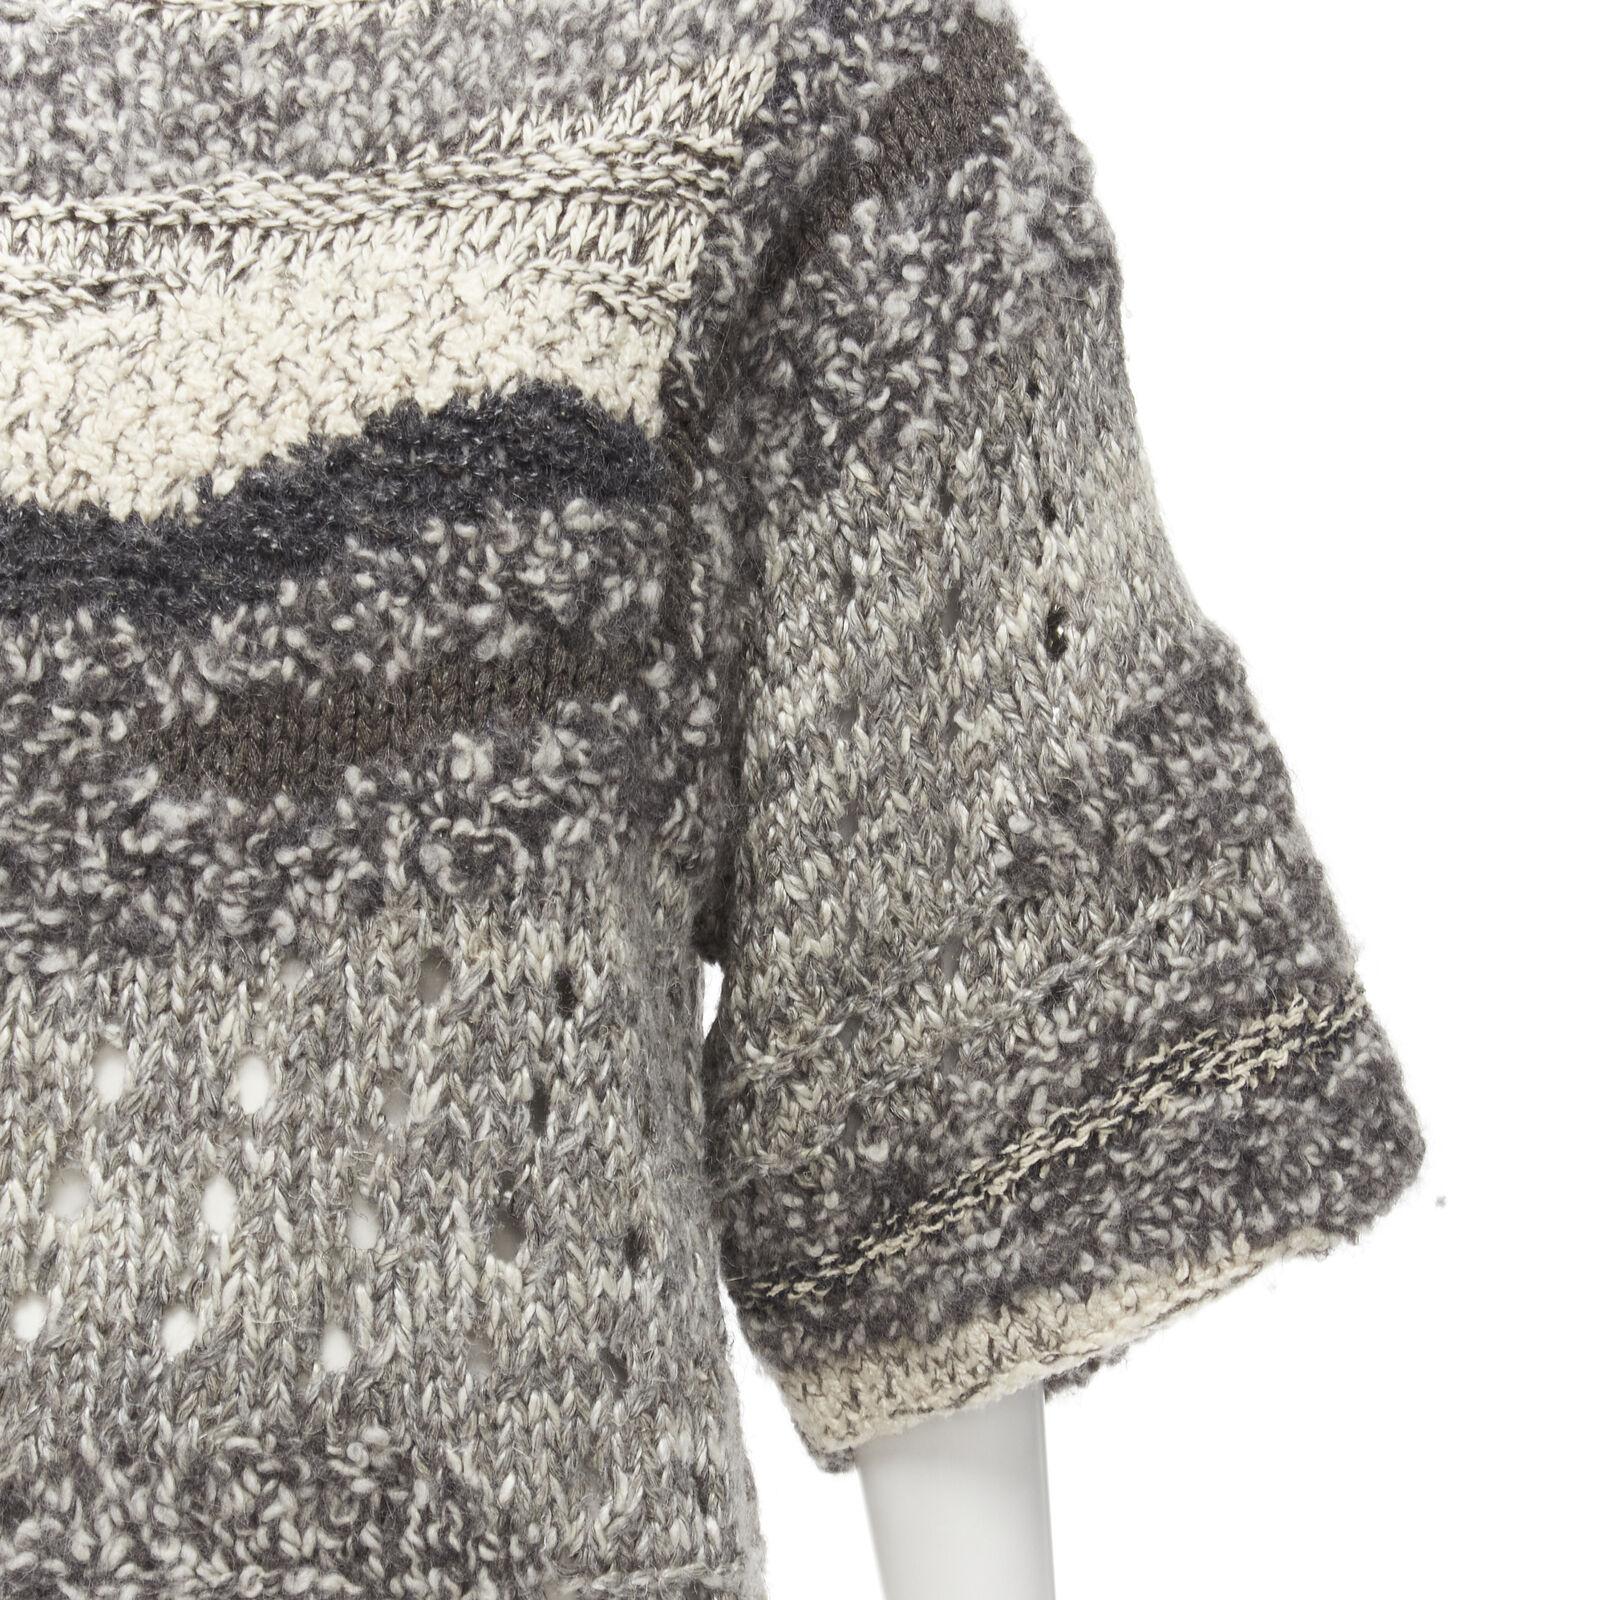 ISABEL MARANT silk blend grey speckled yarn oversized chunky knit sweater FR36 S
Reference: LNKO/A02038
Brand: Isabel Marant
Designer: Isabel Marant
Material: Silk, Linen
Color: Grey
Pattern: Abstract
Closure: Pullover
Made in: